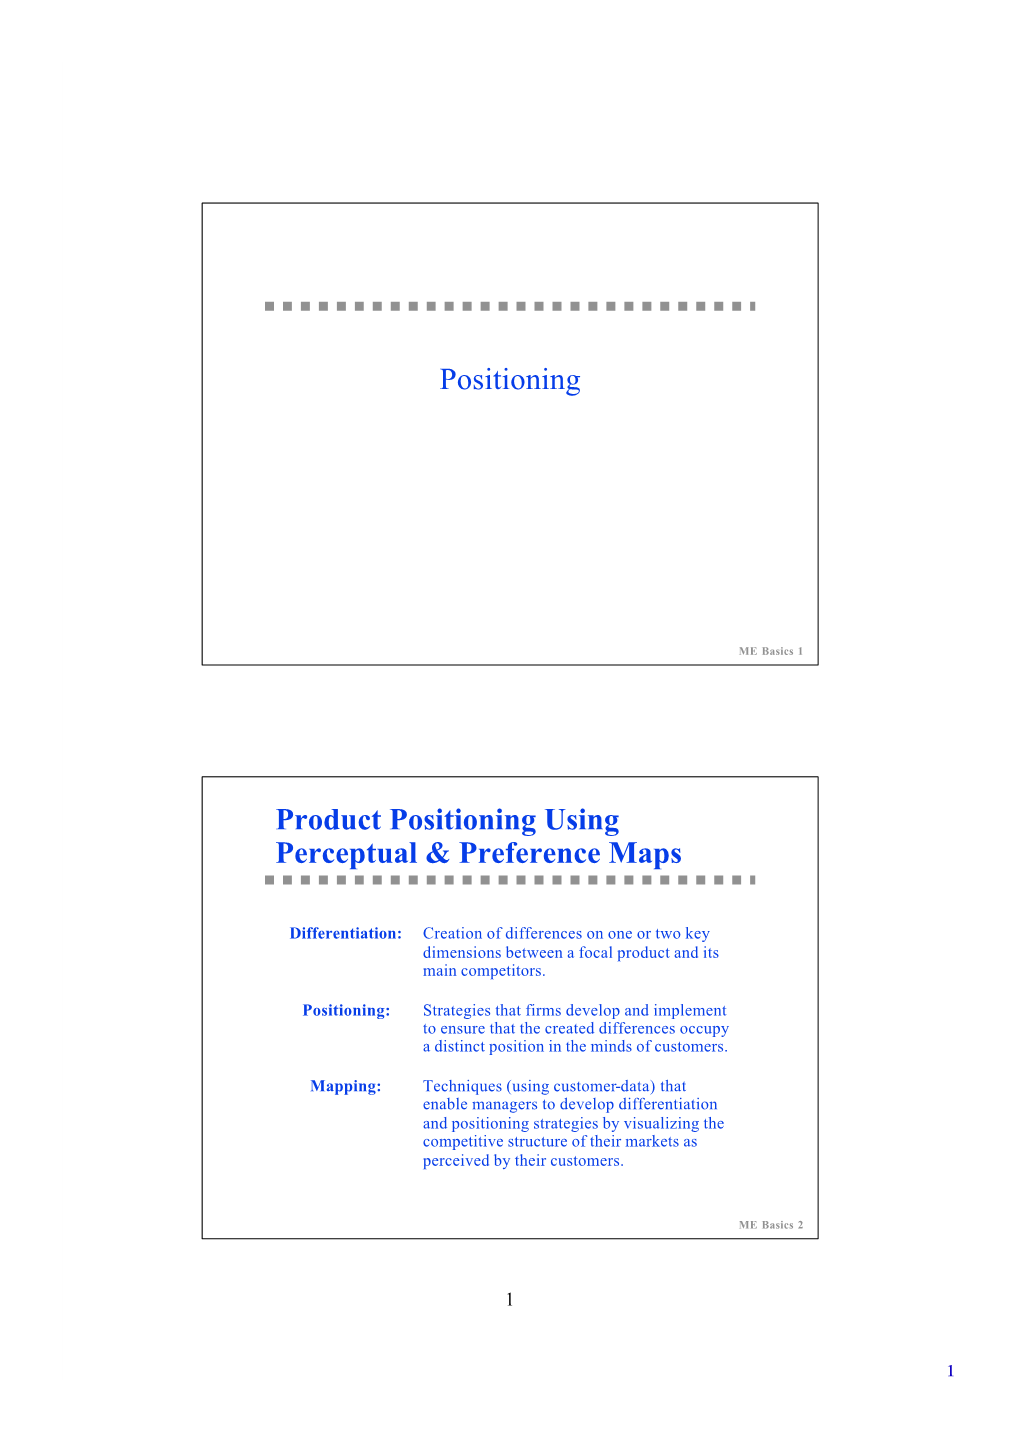 Product Positioning Using Perceptual & Preference Maps